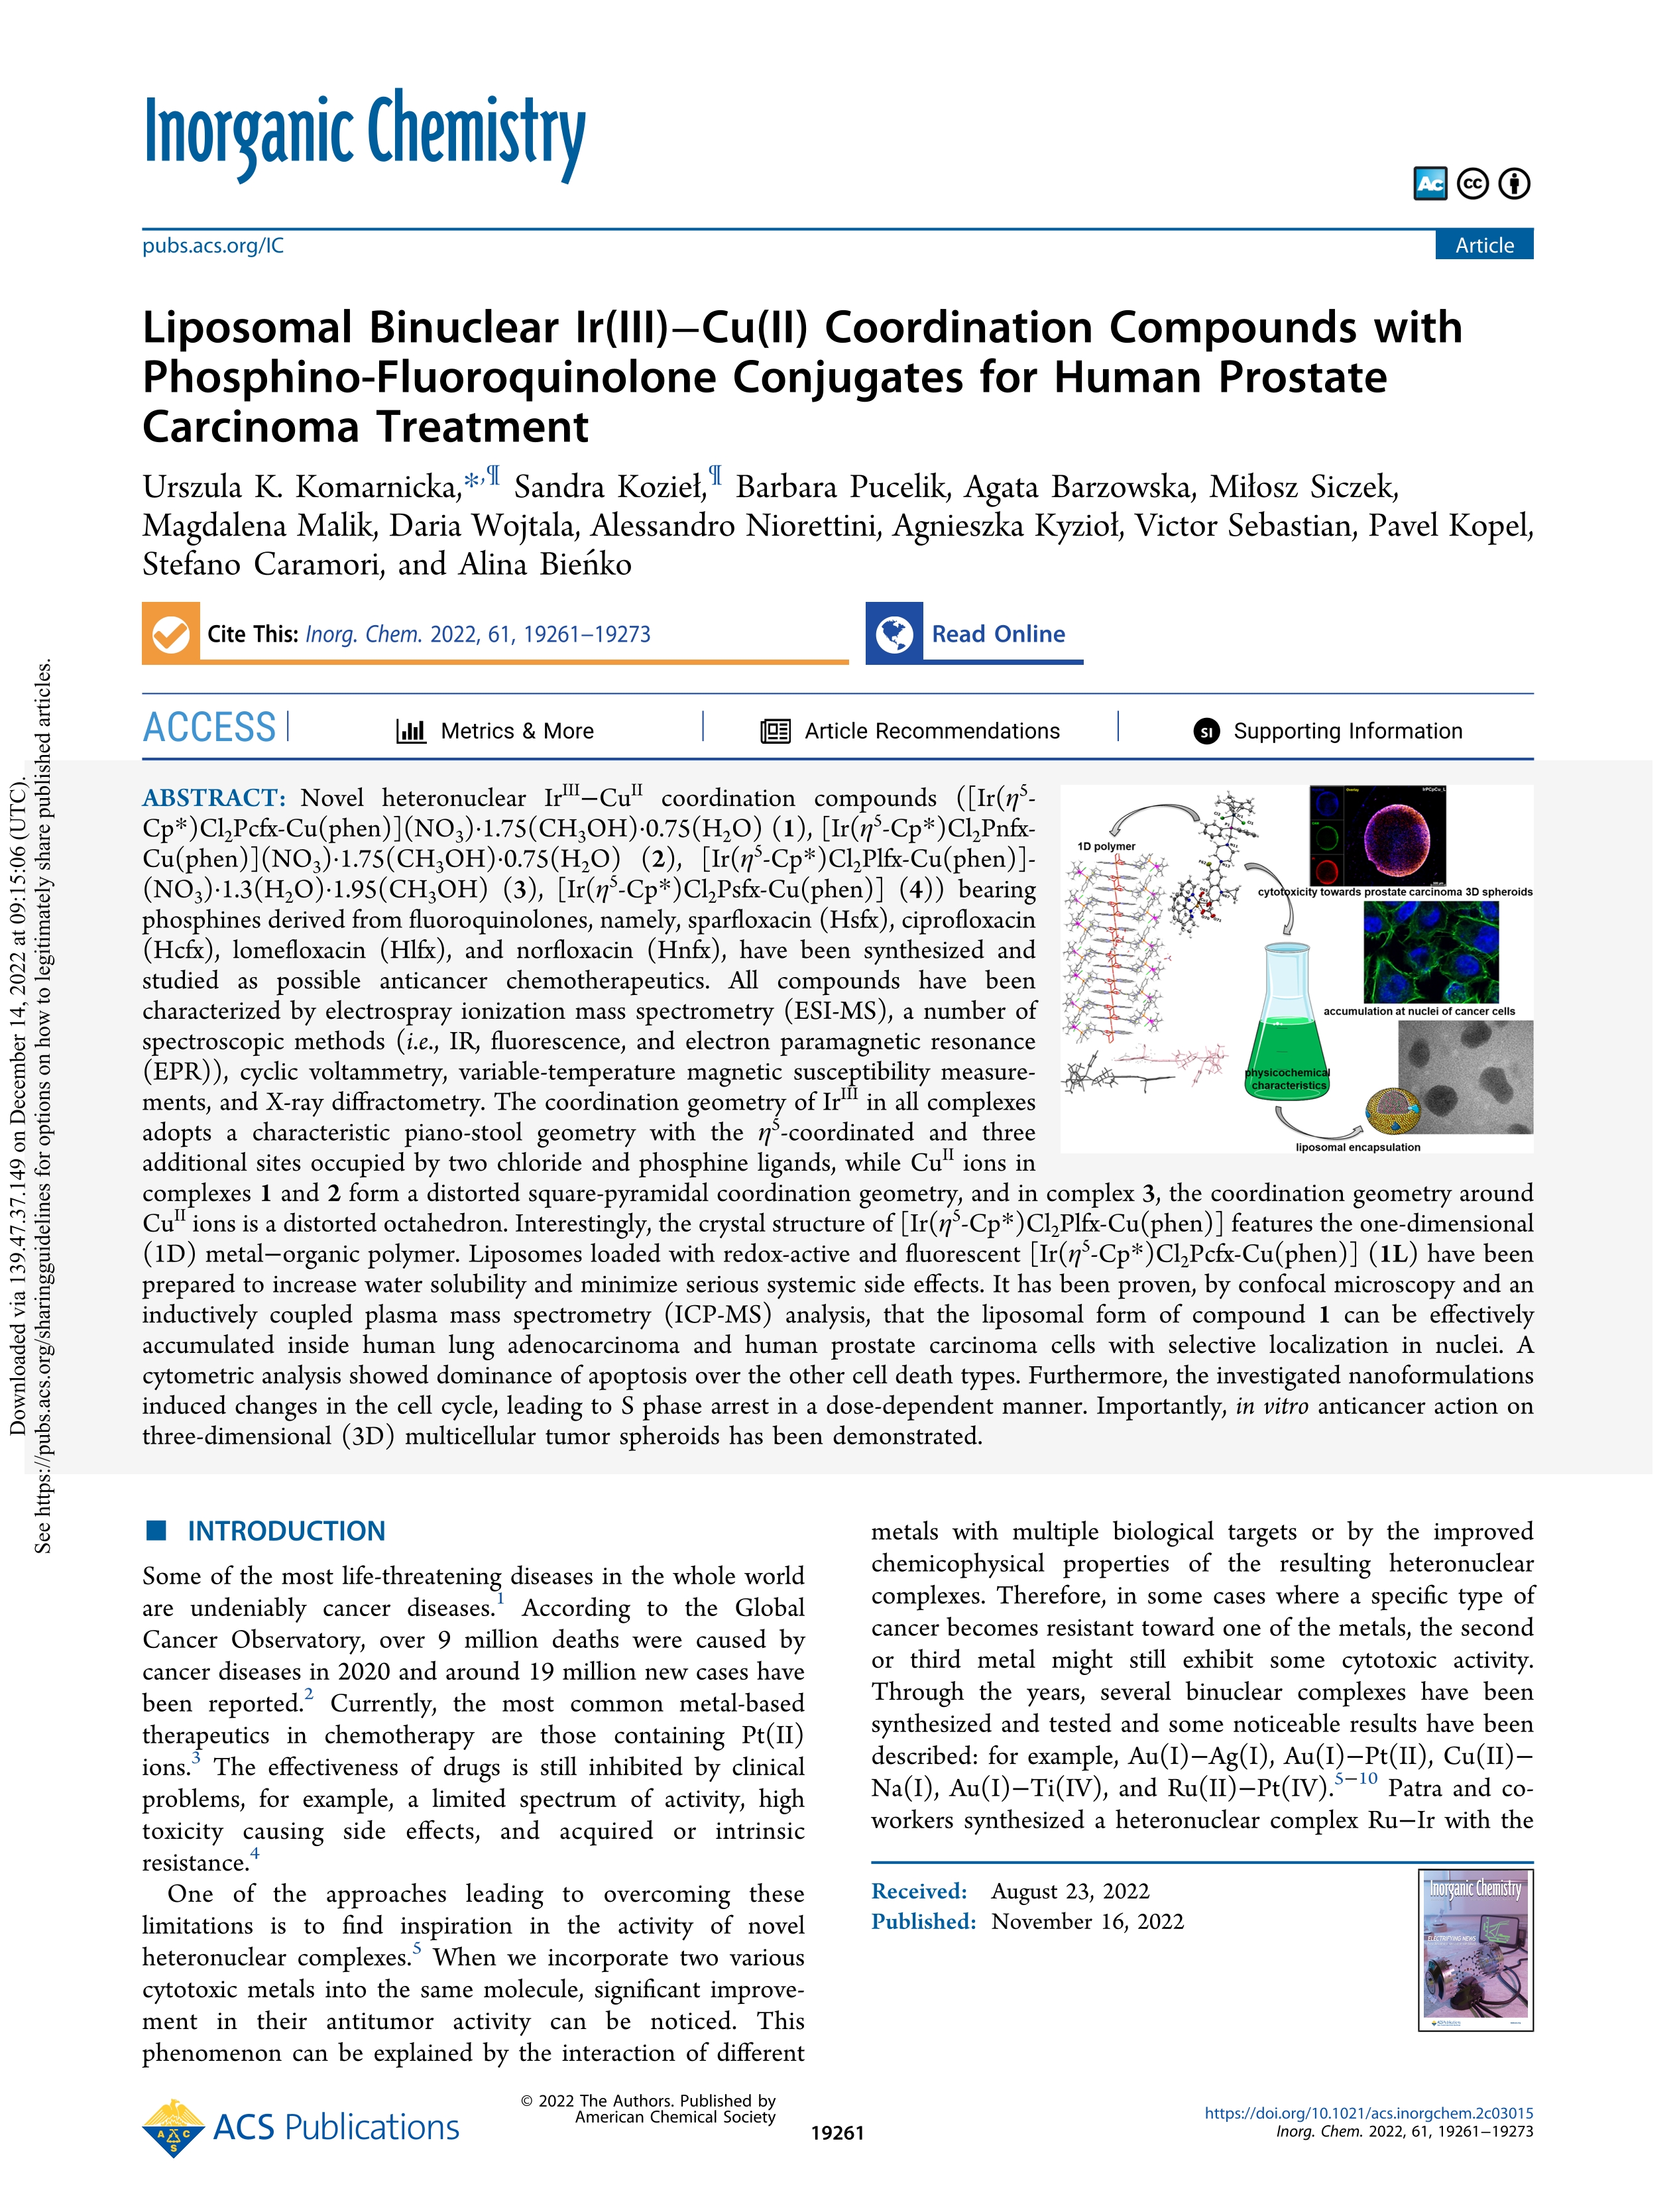 Liposomal Binuclear Ir(III)–Cu(II) Coordination Compounds with Phosphino-Fluoroquinolone Conjugates for Human Prostate Carcinoma Treatment